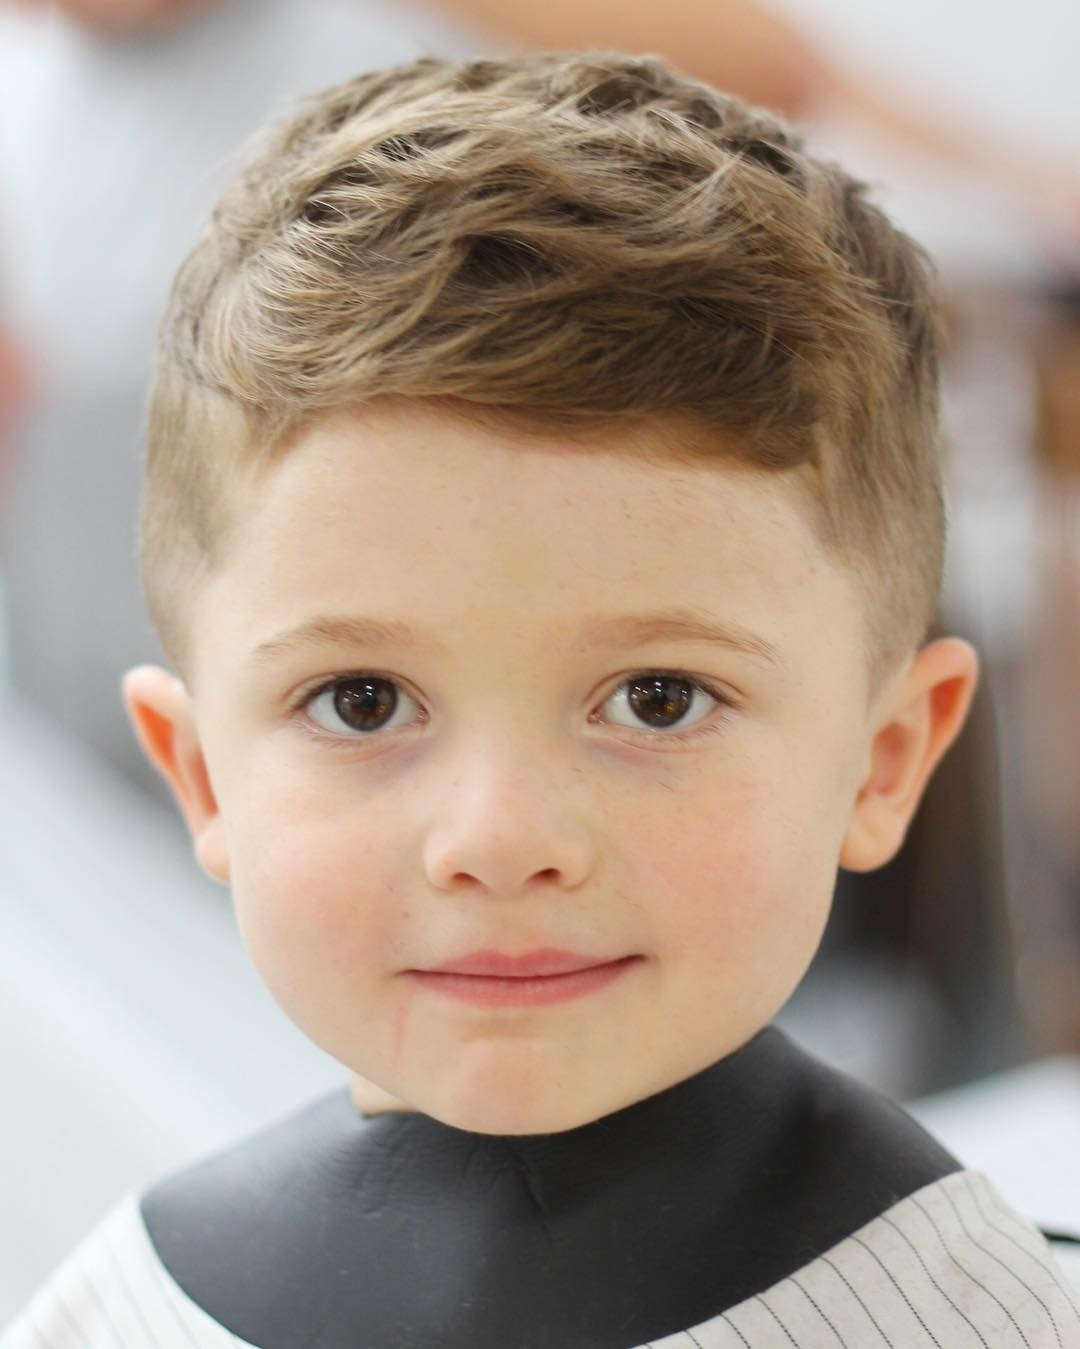 Hairstyles For Kids Boys
 Haircut For Round Face Child Wavy Haircut